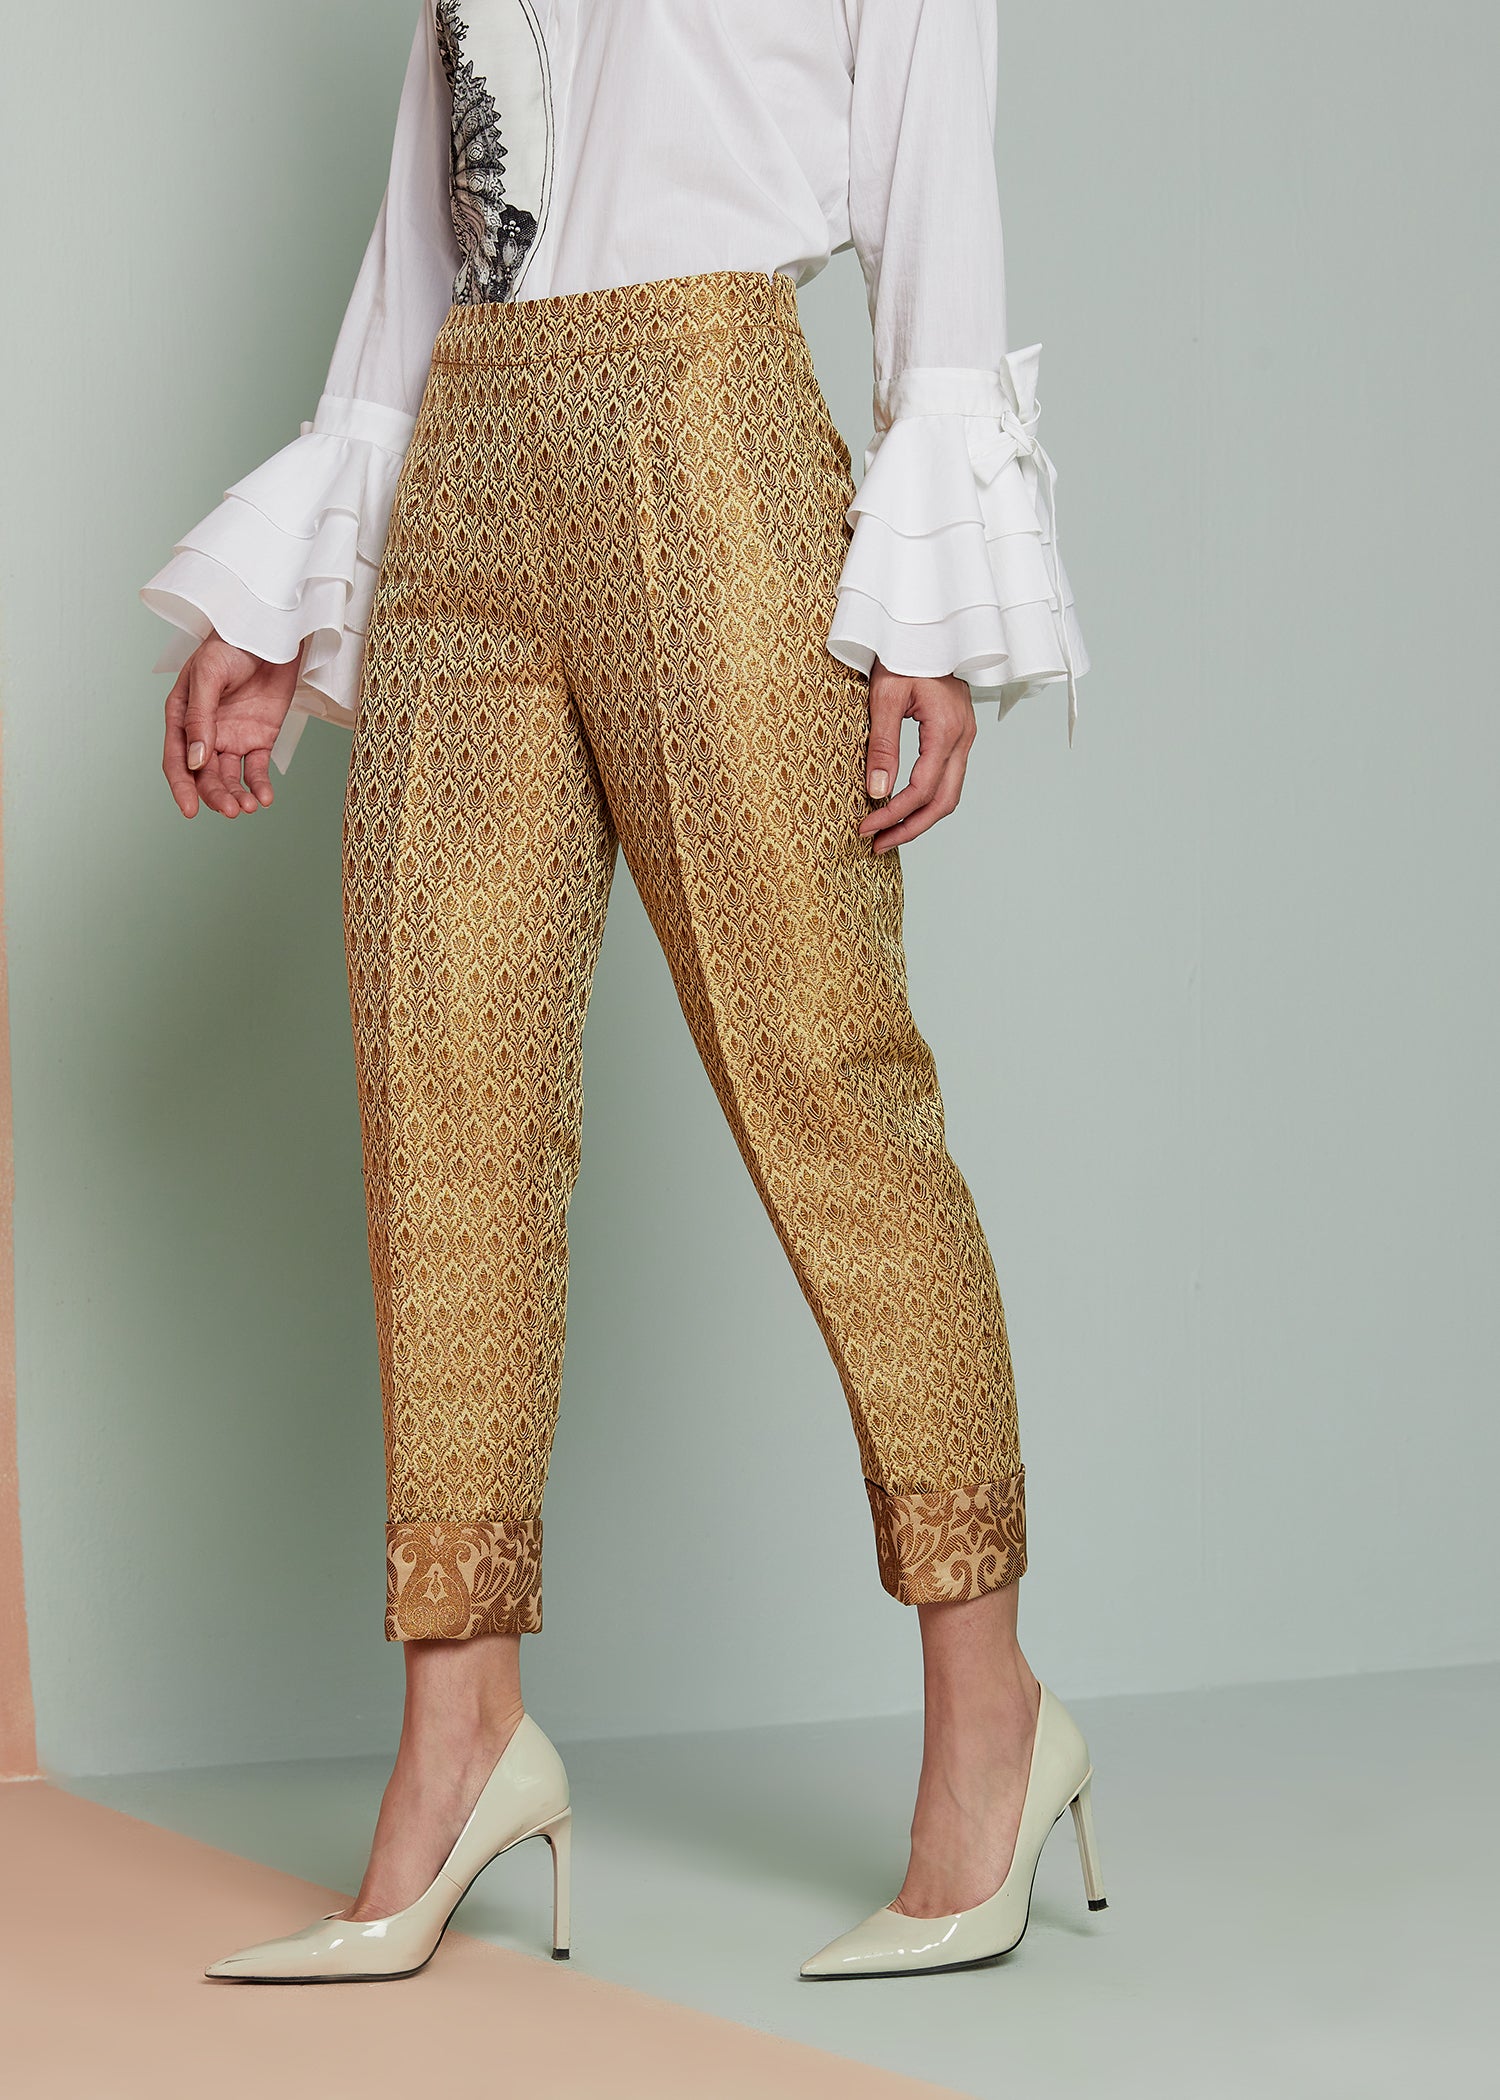 Black Cigarette Pants with Gold embroidery and sequin work – Indi Ethnics